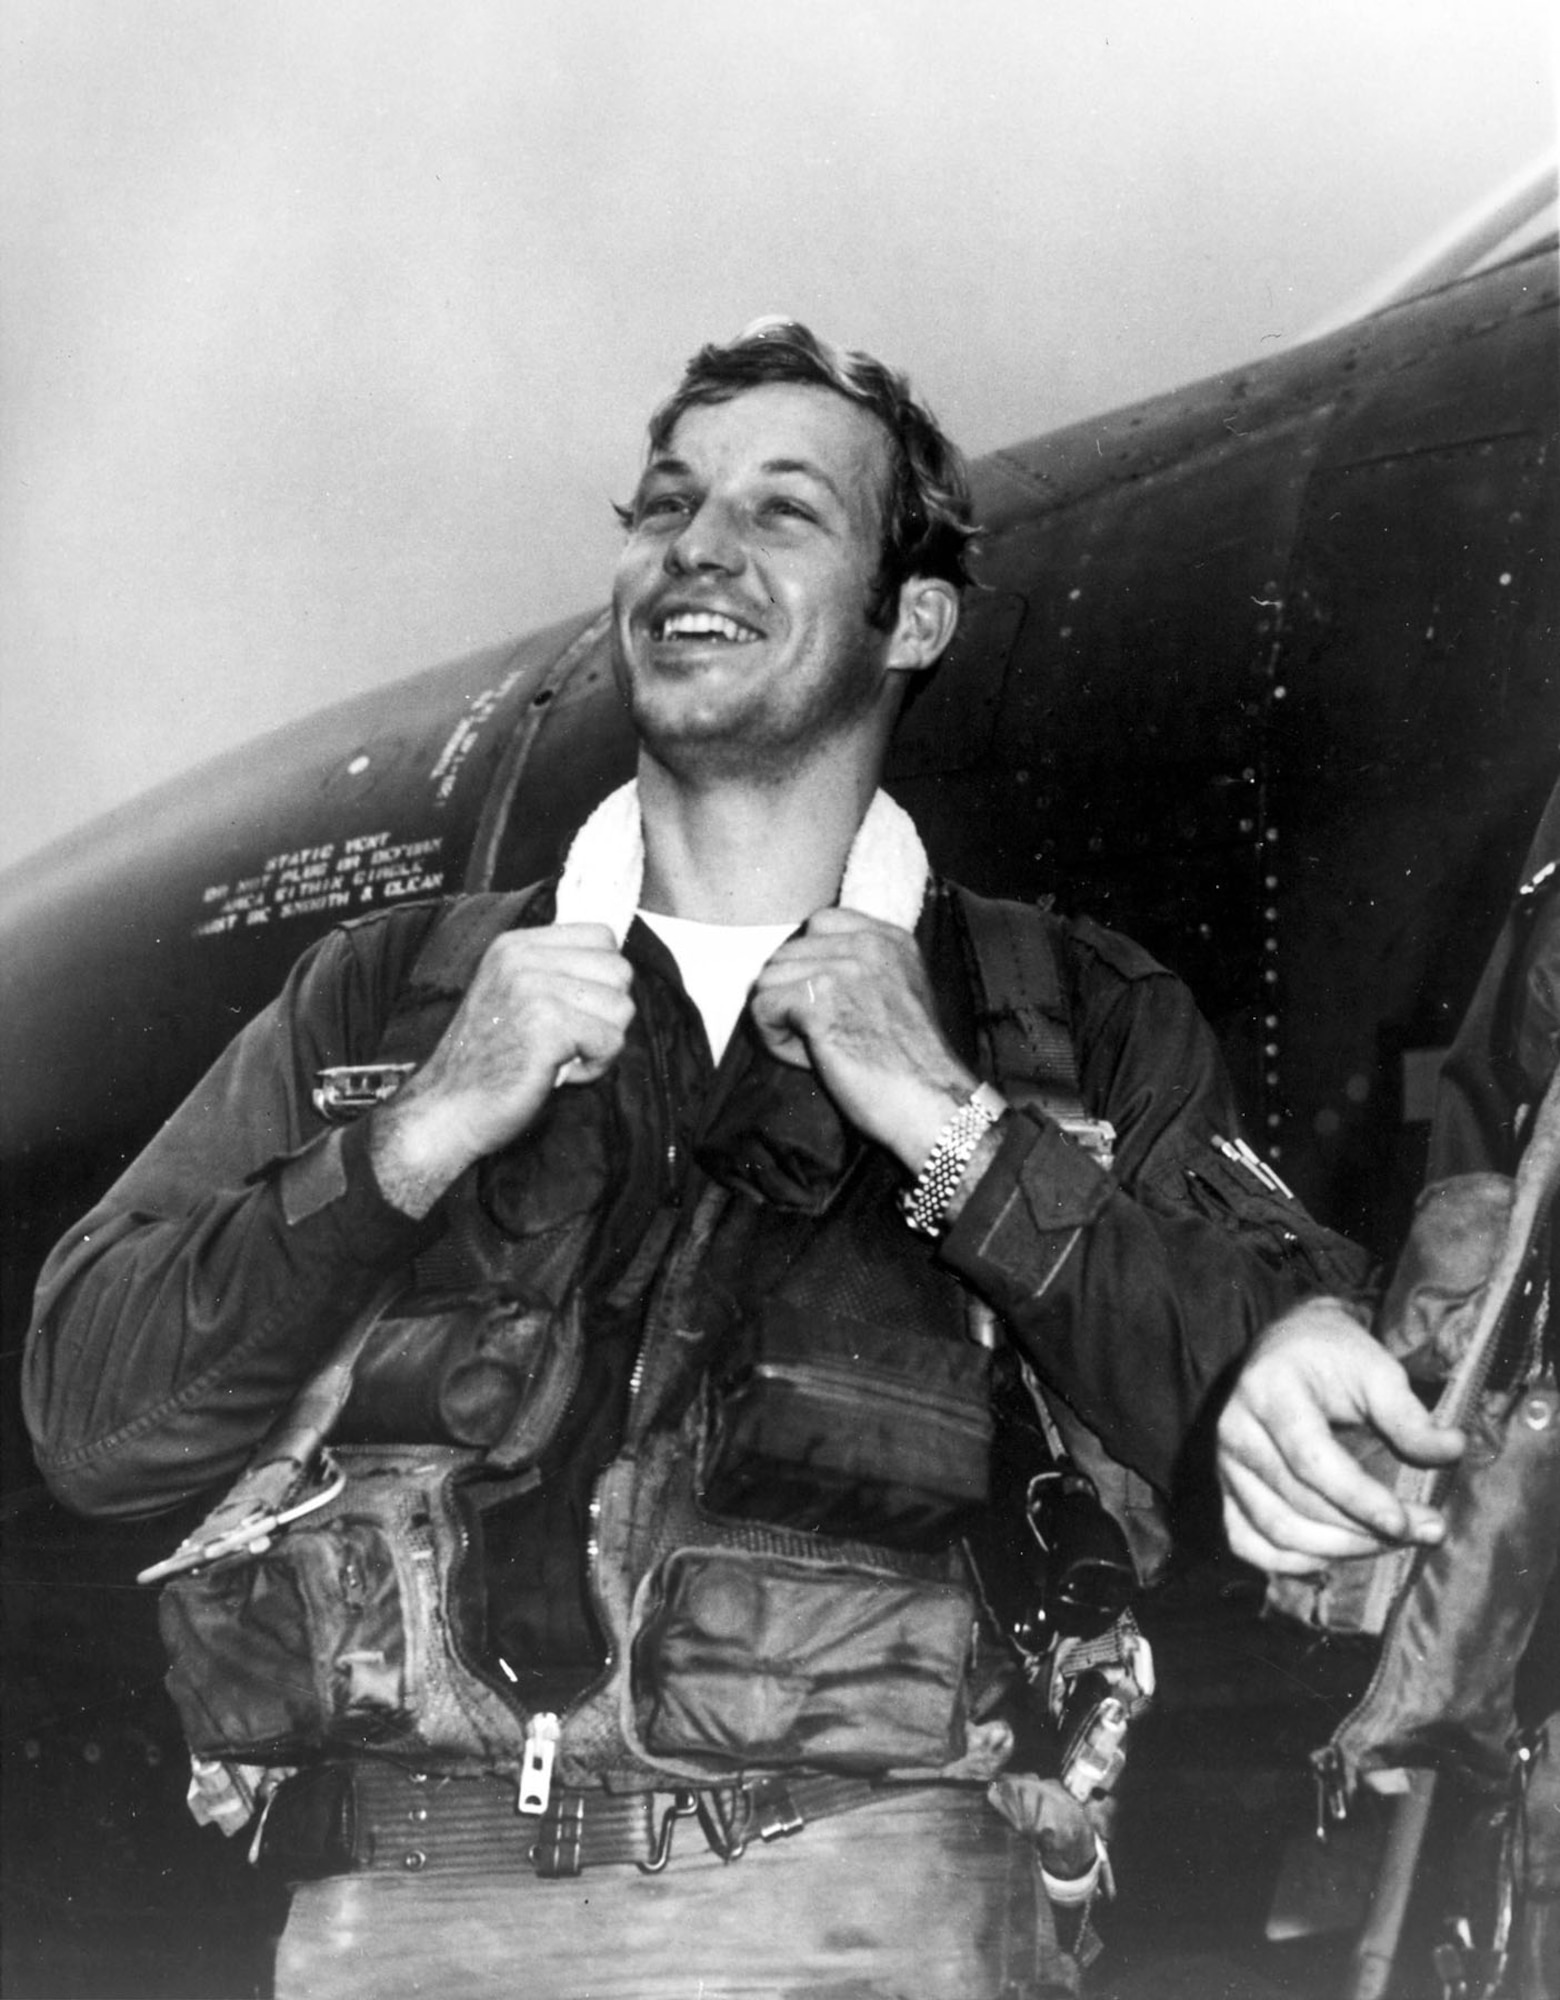 Capt. Richard “Steve” Ritchie, 555th Tactical Fighter Squadron, scored five MiG-21 victories between May and August 1972, including one double-victory mission. He was the USAF’s only pilot ace of the Southeast Asia War. (U.S. Air Force photo)